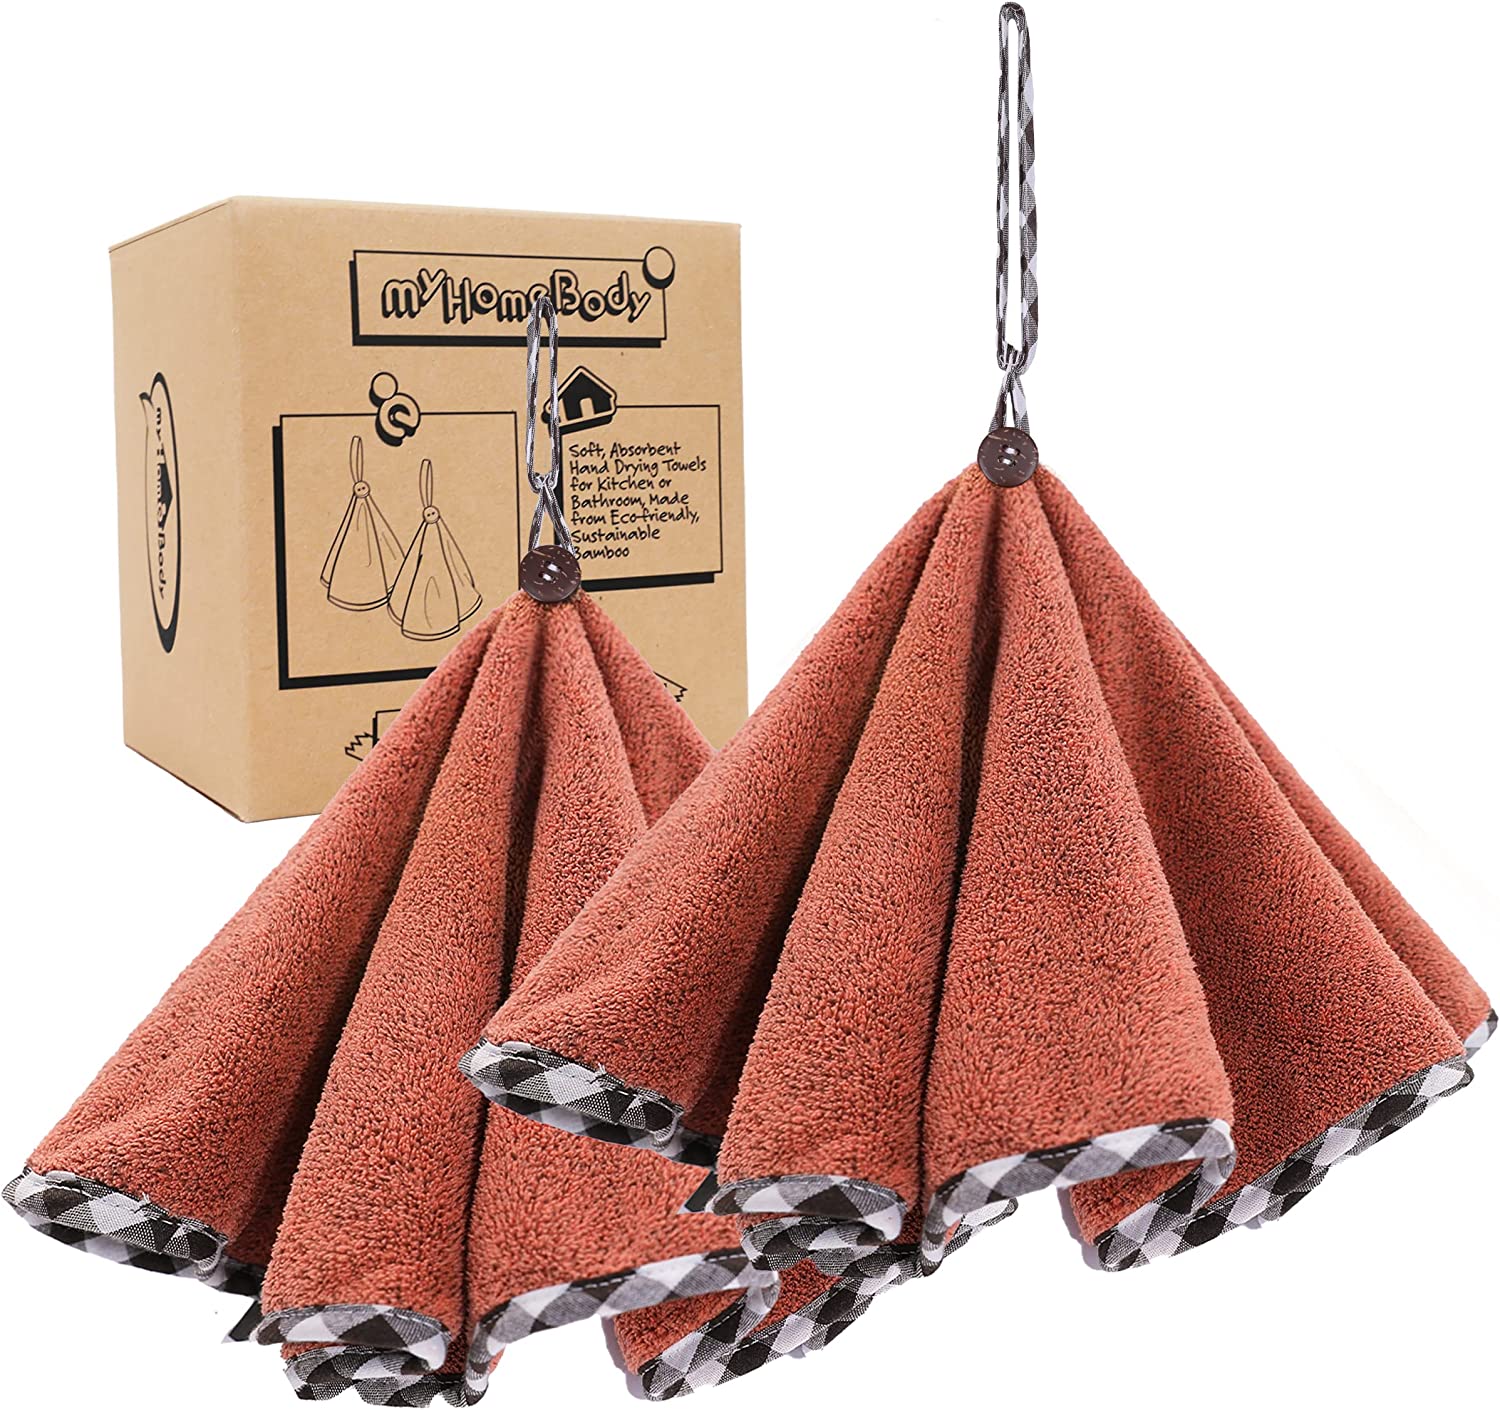 Kitchen Towels with Hanging Loop - Multipurpose Use